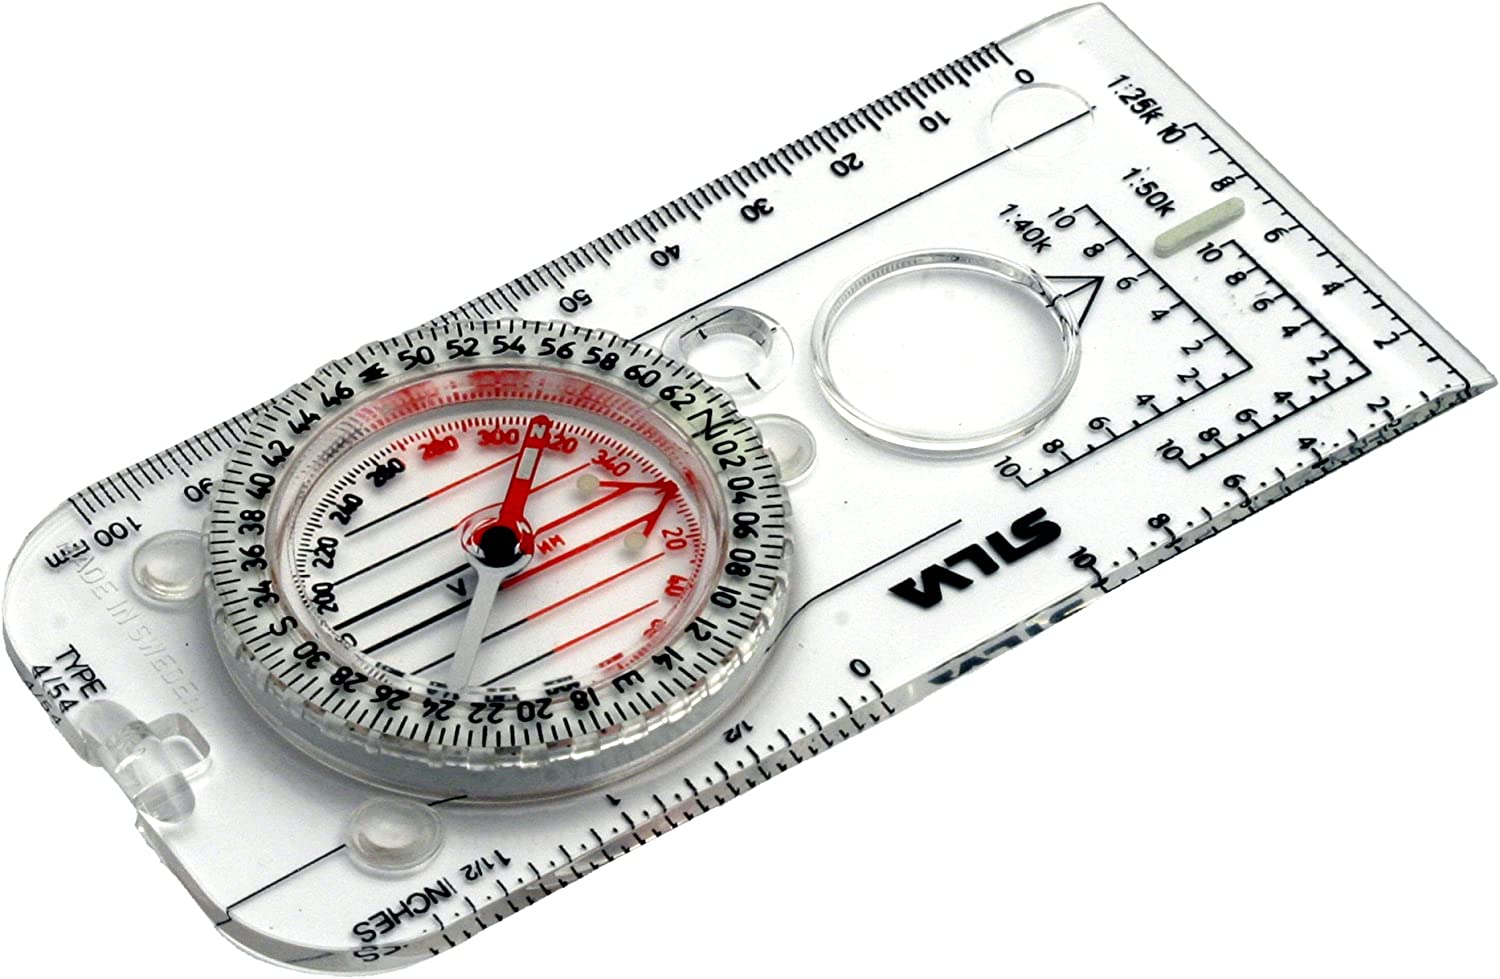 Silva Expedition 4 Militaire 6400/360 Compass